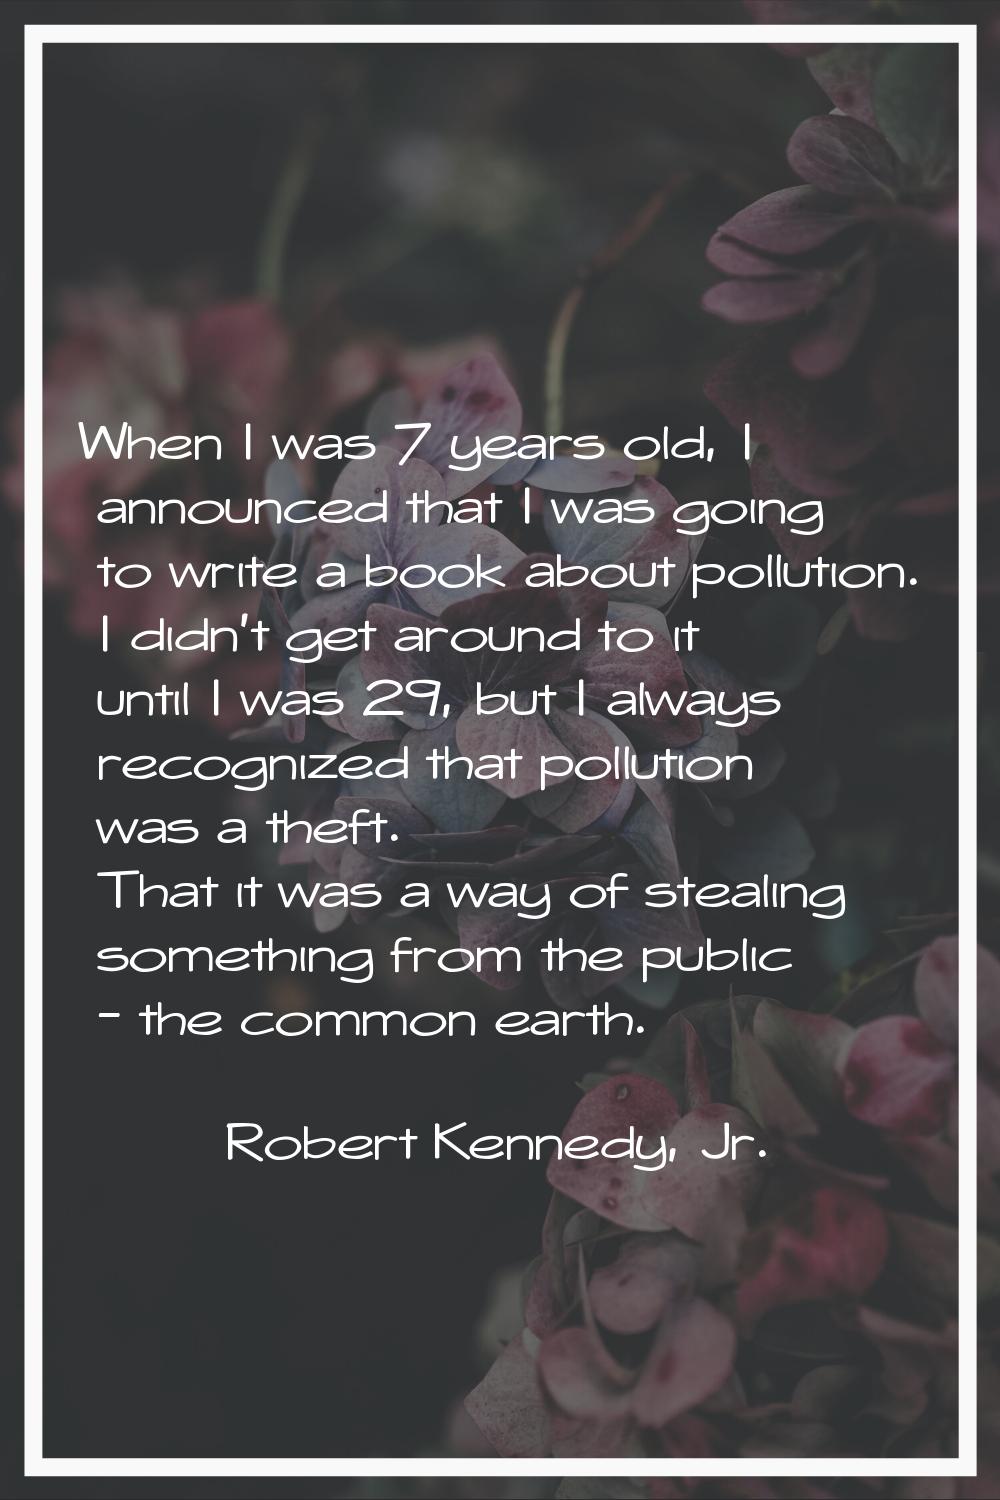 When I was 7 years old, I announced that I was going to write a book about pollution. I didn't get 